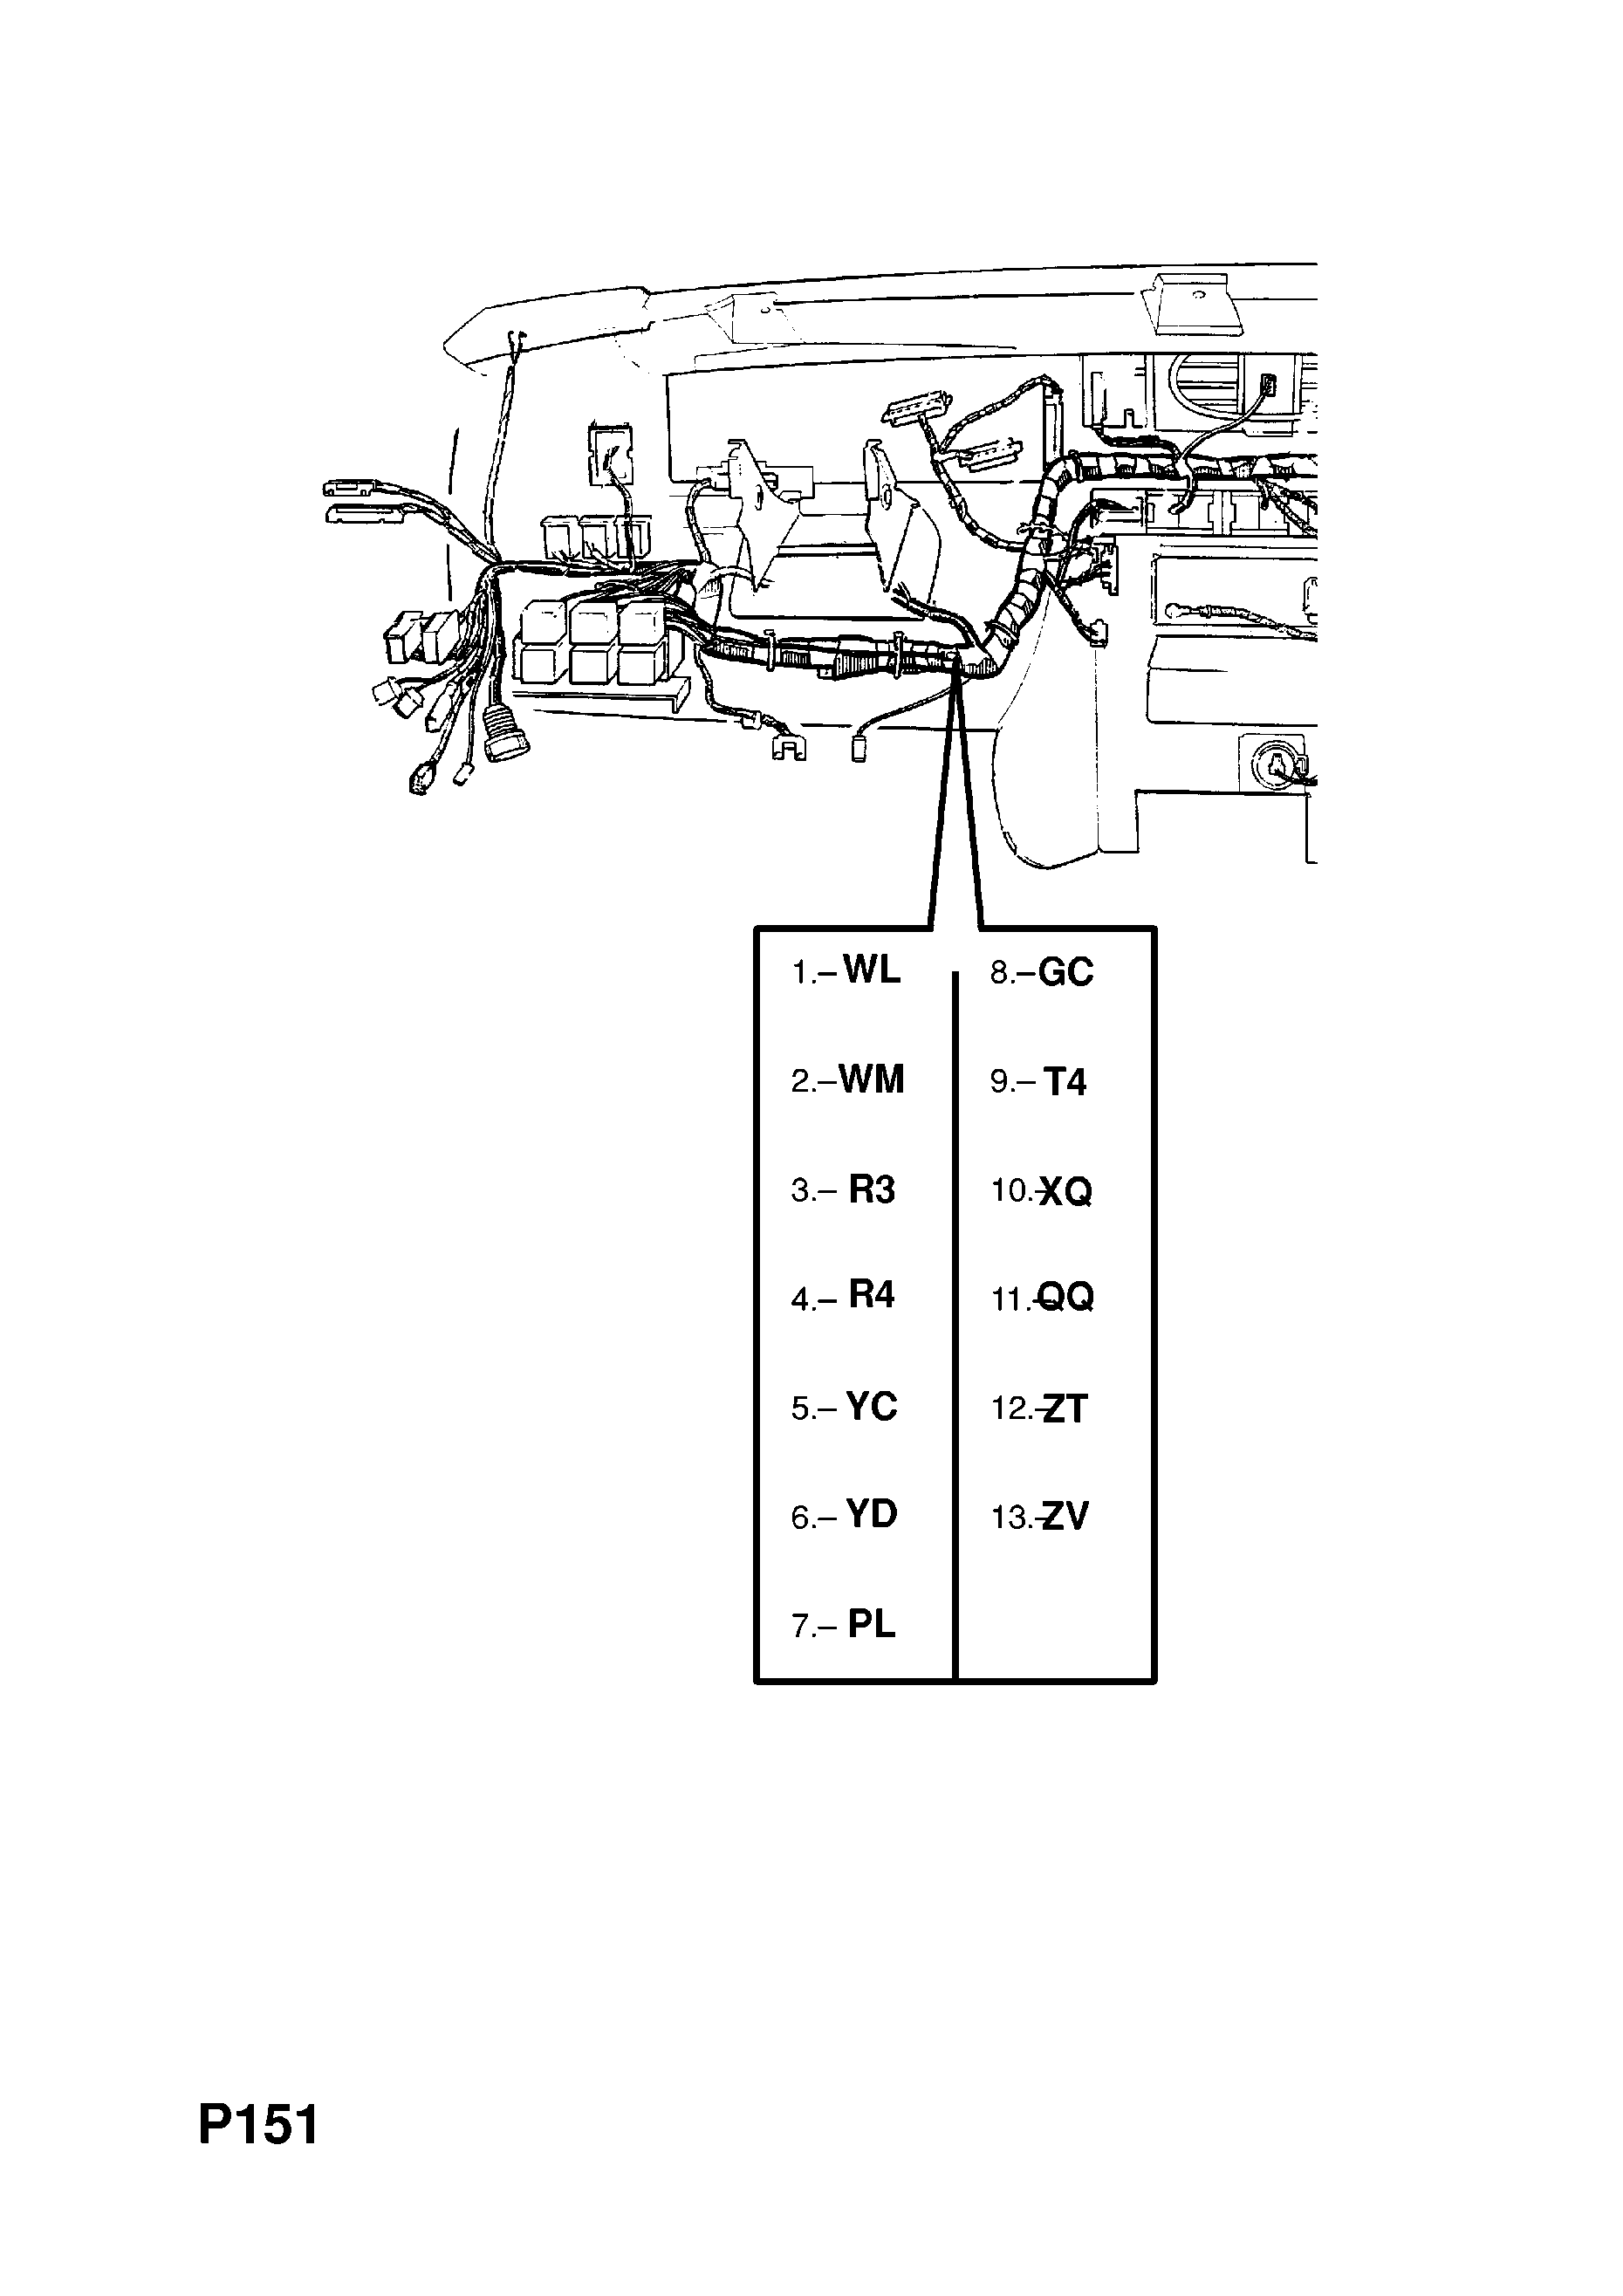 INSTRUMENT PANEL WIRING HARNESS (CONTD.) <small><i>[M1000001 (CONTD.) FOR AIR CONDITIONING, MANUAL TRANSMISSION EXCEPT LCD INSTRUMENTS (CONTD.)]</i></small>